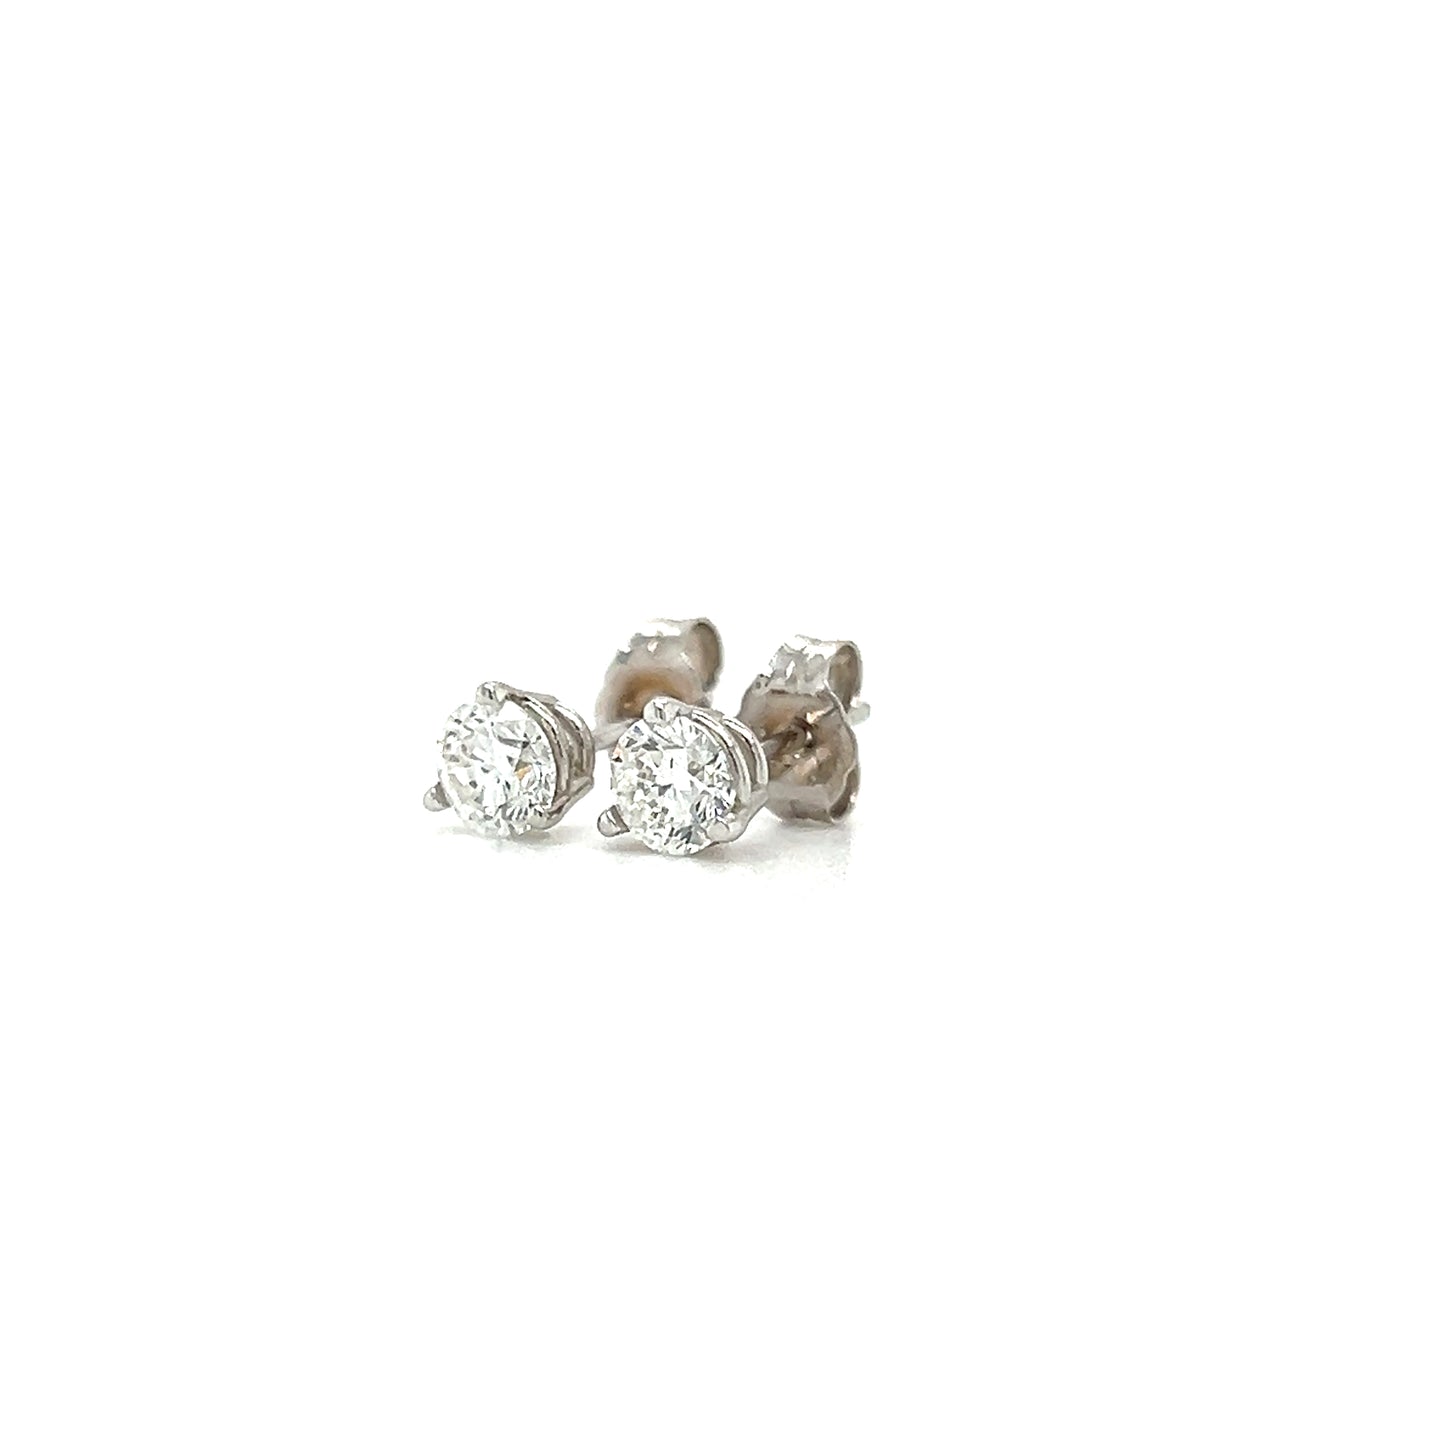 Diamond 0.72ctw Stud Earrings with Blue Sapphire Jackets in 14K White Gold